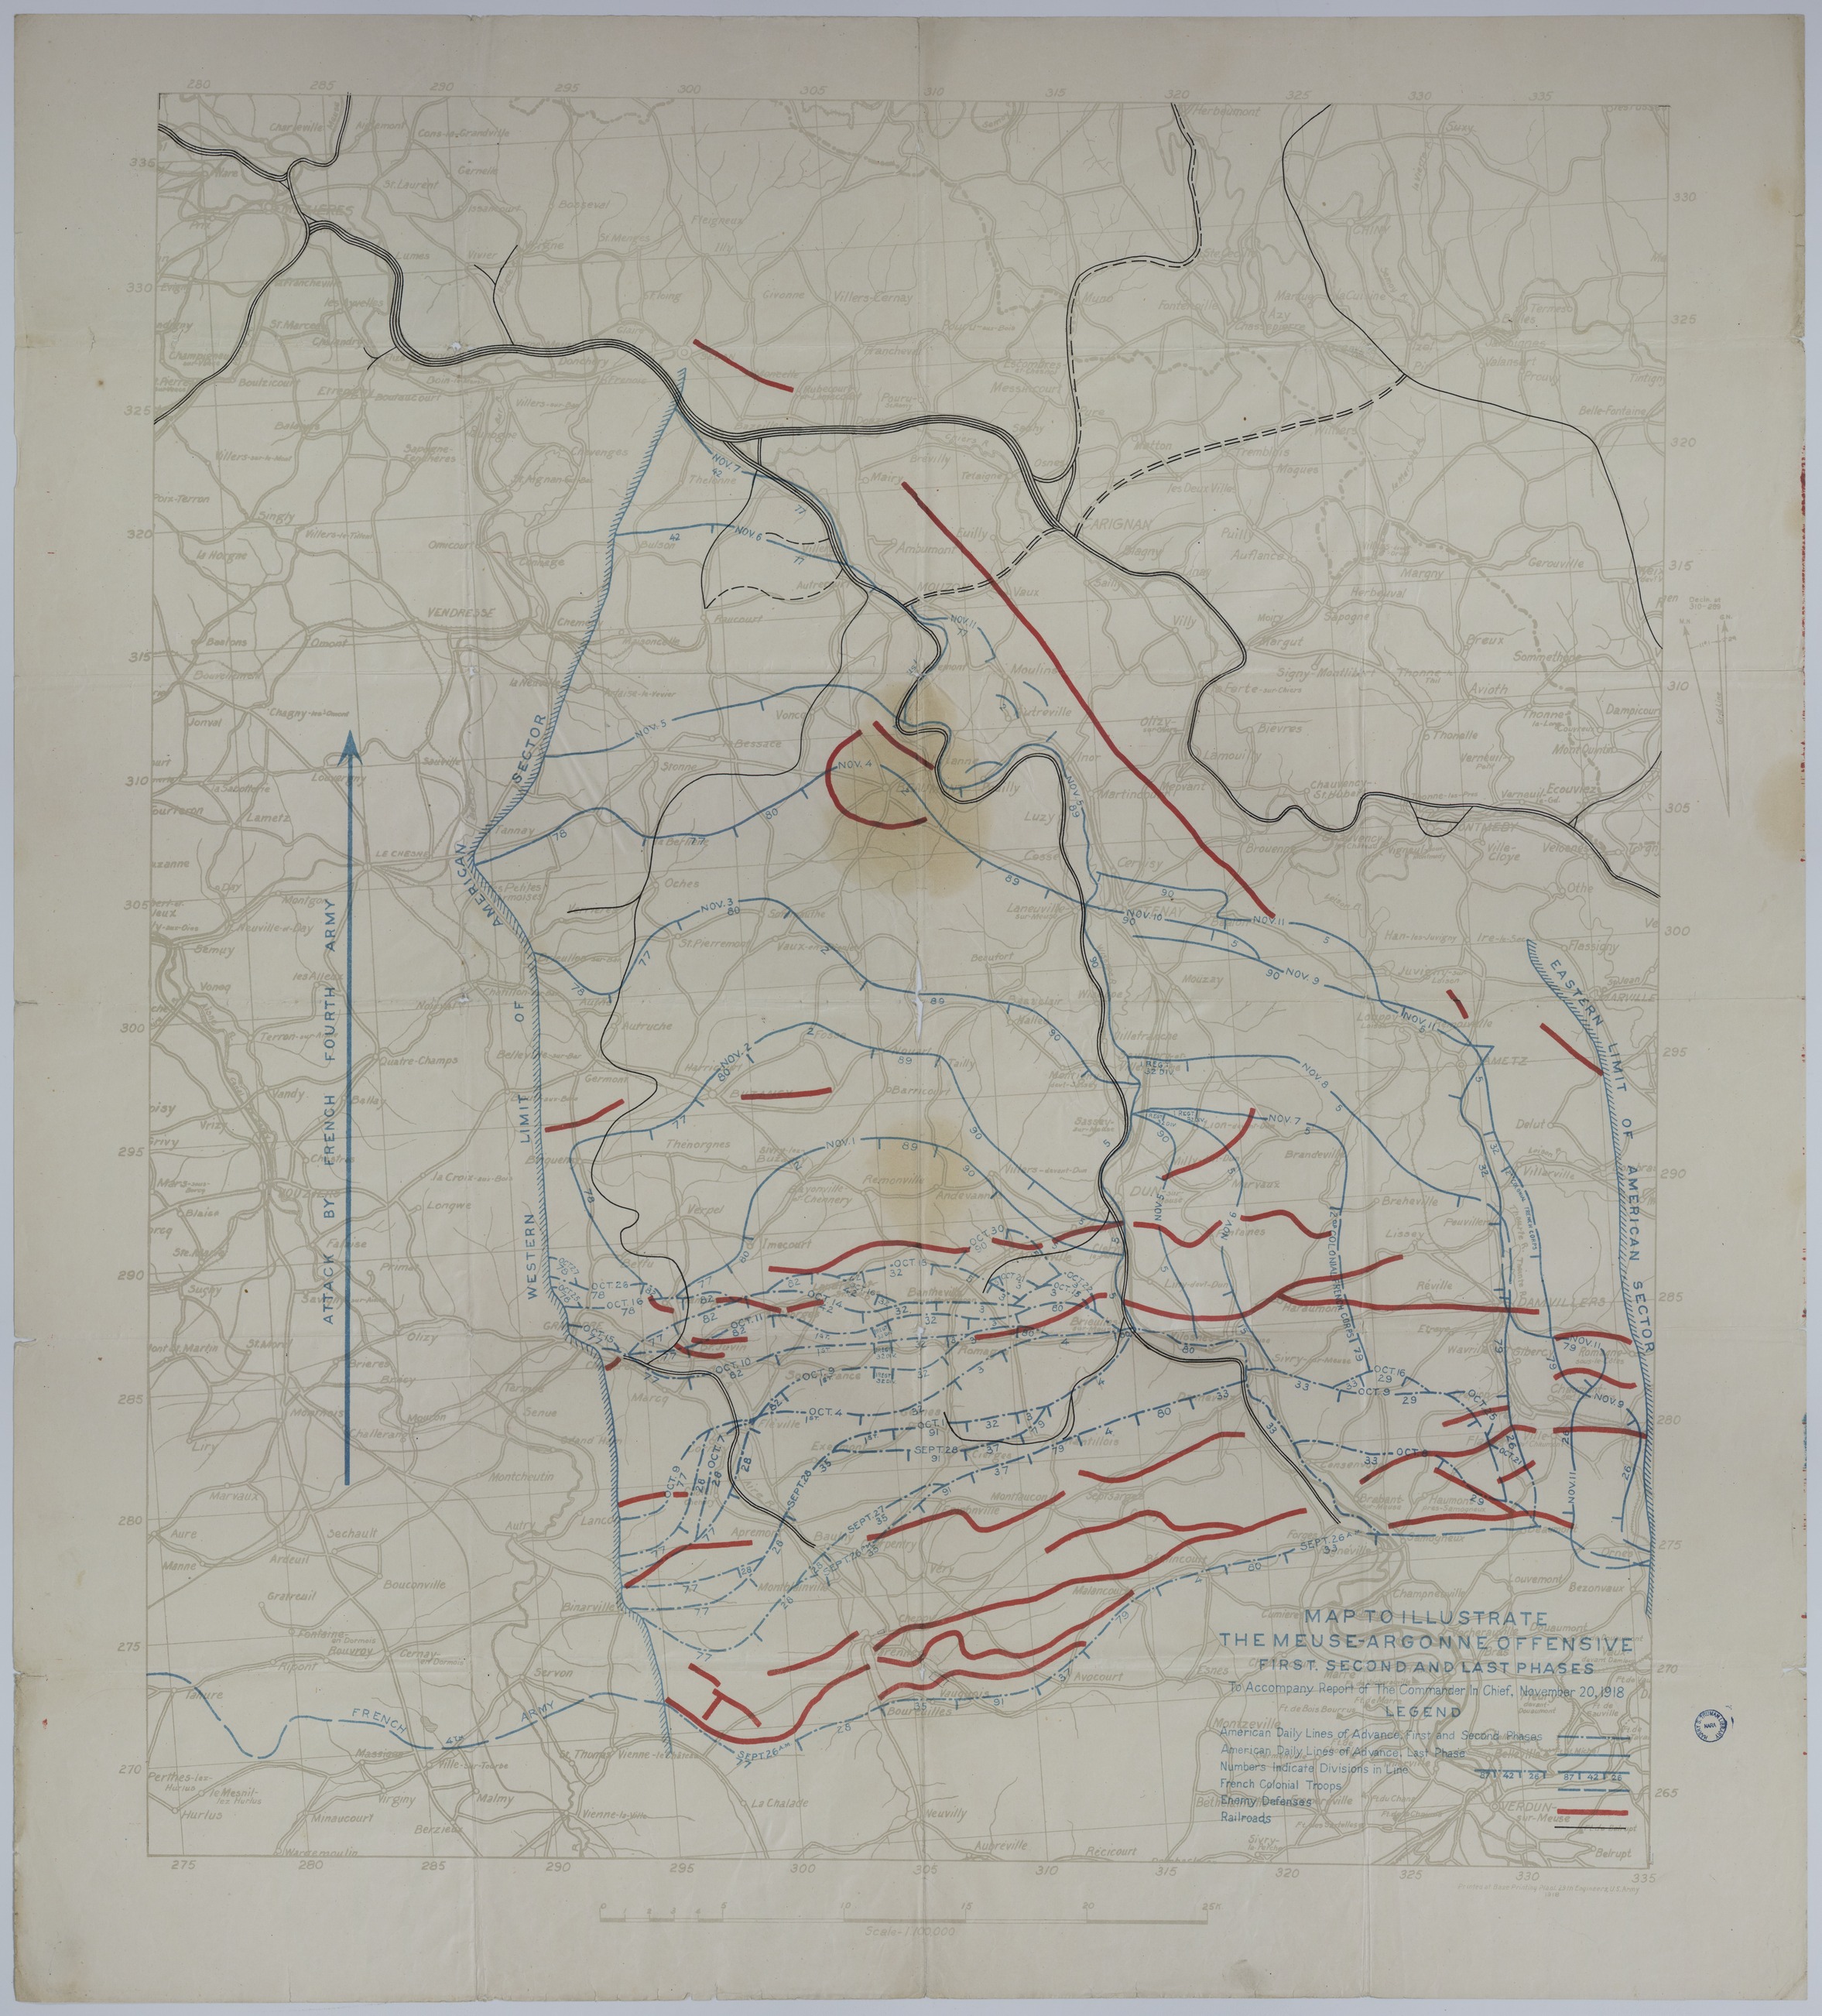 Map of Allied Divisional Movement During the Meuse-Argonne Offensive